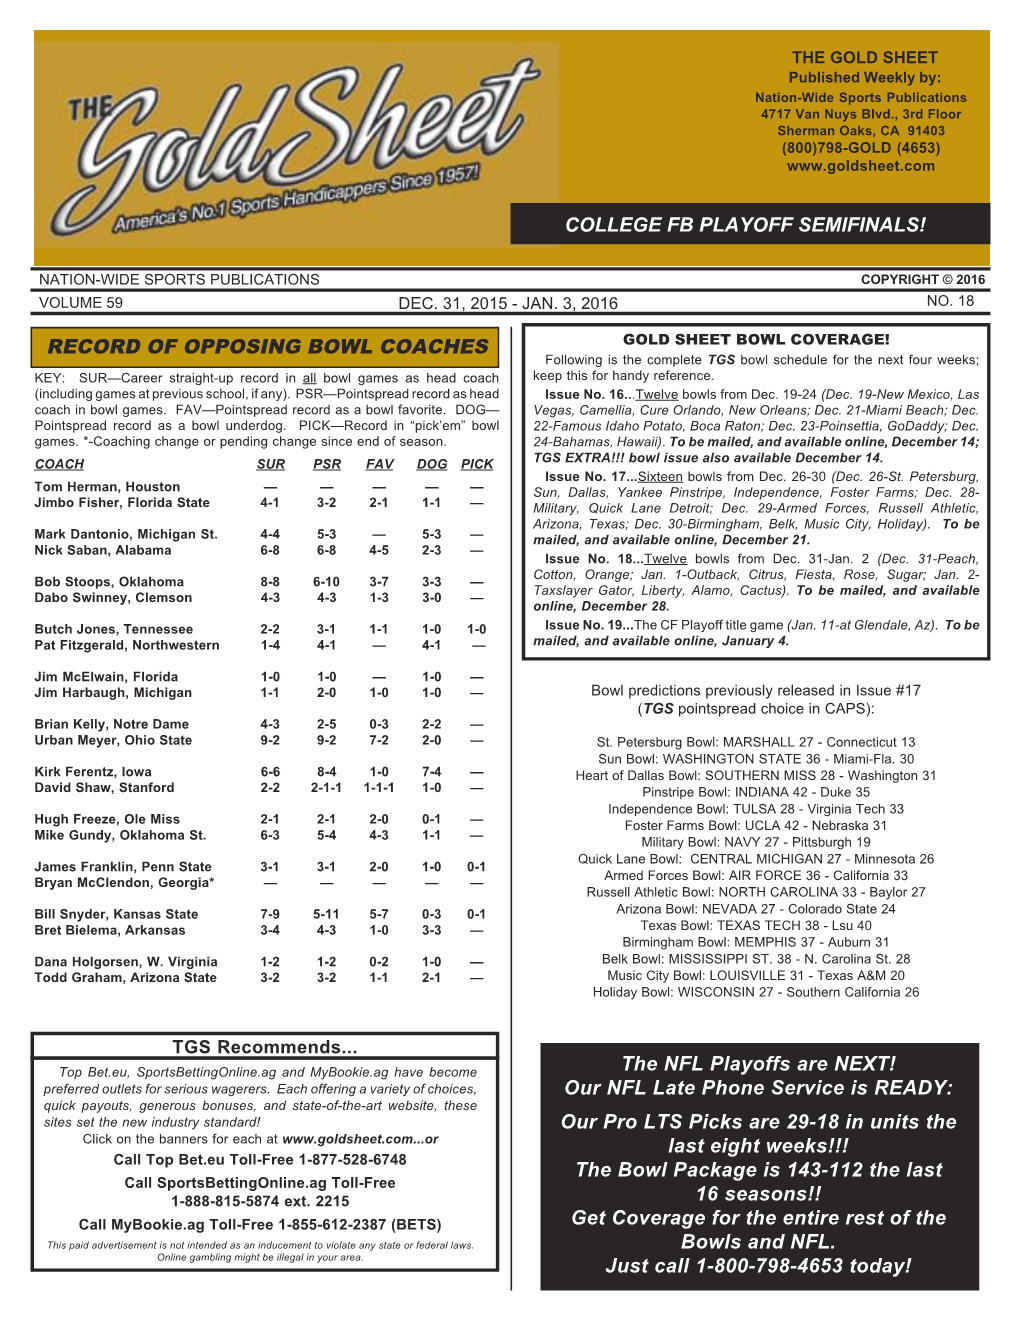 OLD SHEET Published Weekly By: Nation-Wide Sports Publications 4717 Van Nuys Blvd., 3Rd Floor Sherman Oaks, CA 91403 (800)798-GOLD (4653)